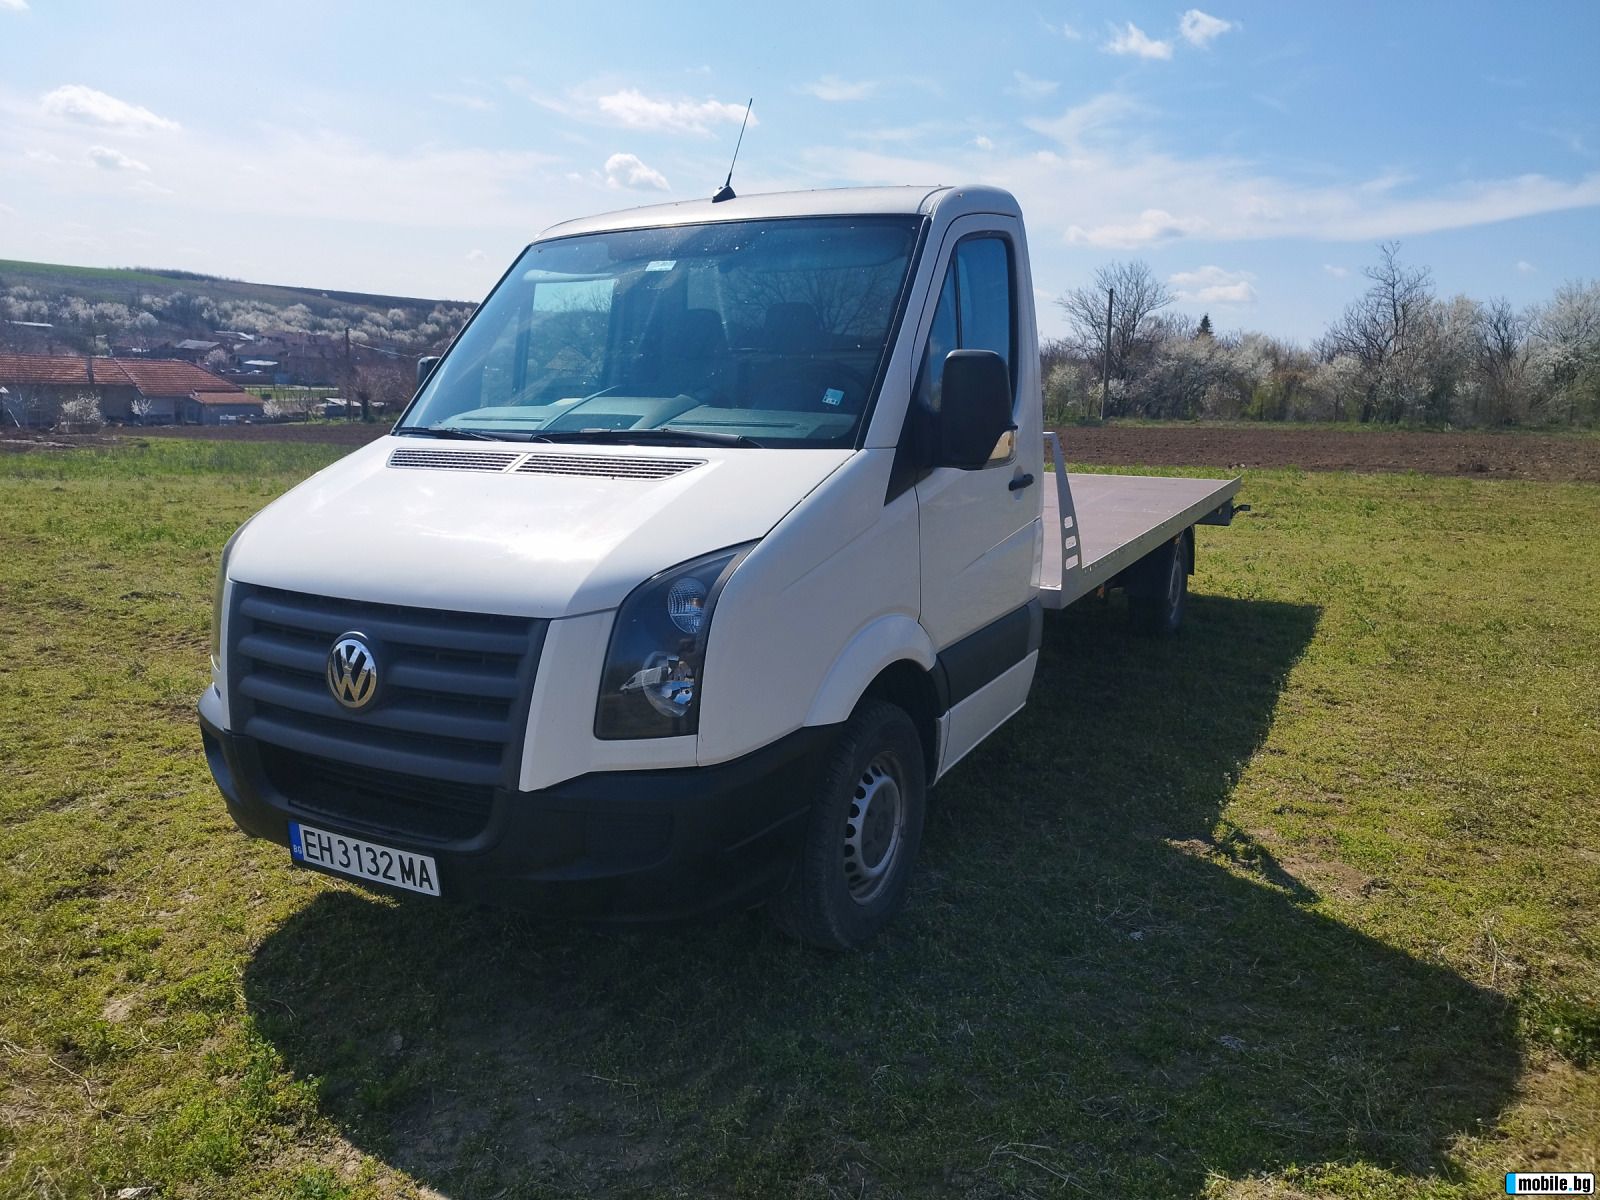 VW Crafter 2.5  /110ps | Mobile.bg   9